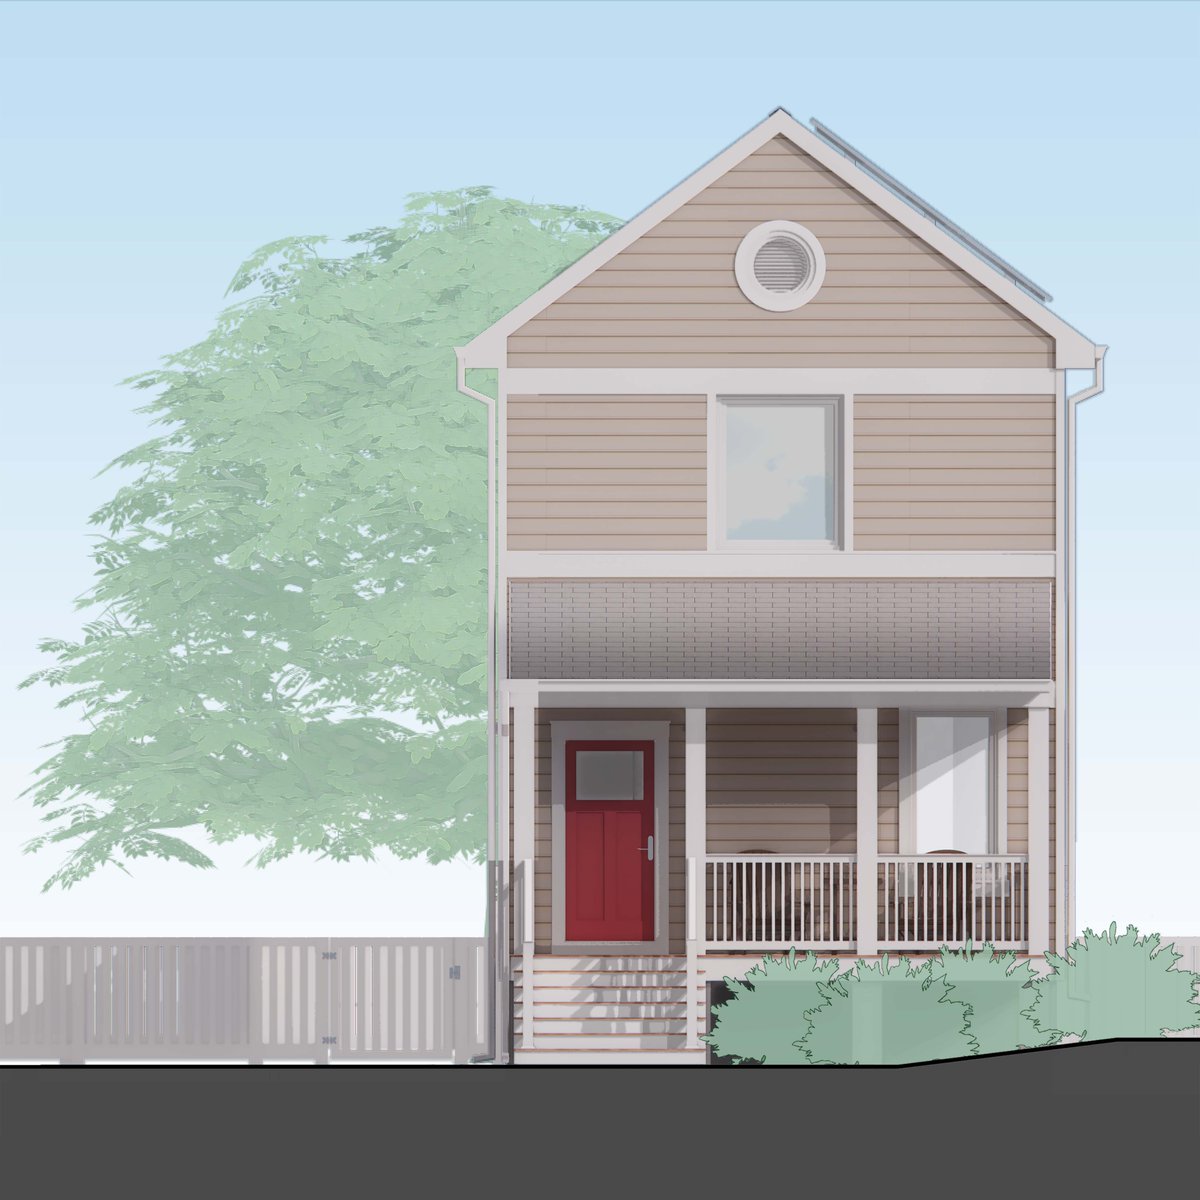 When construction is completed this summer, these affordable 2-story modular 'HIP homes' will feature roof-top solar and HIP's signature front porch. 

#ForSale      #ZeroEnergy     #Microgrid